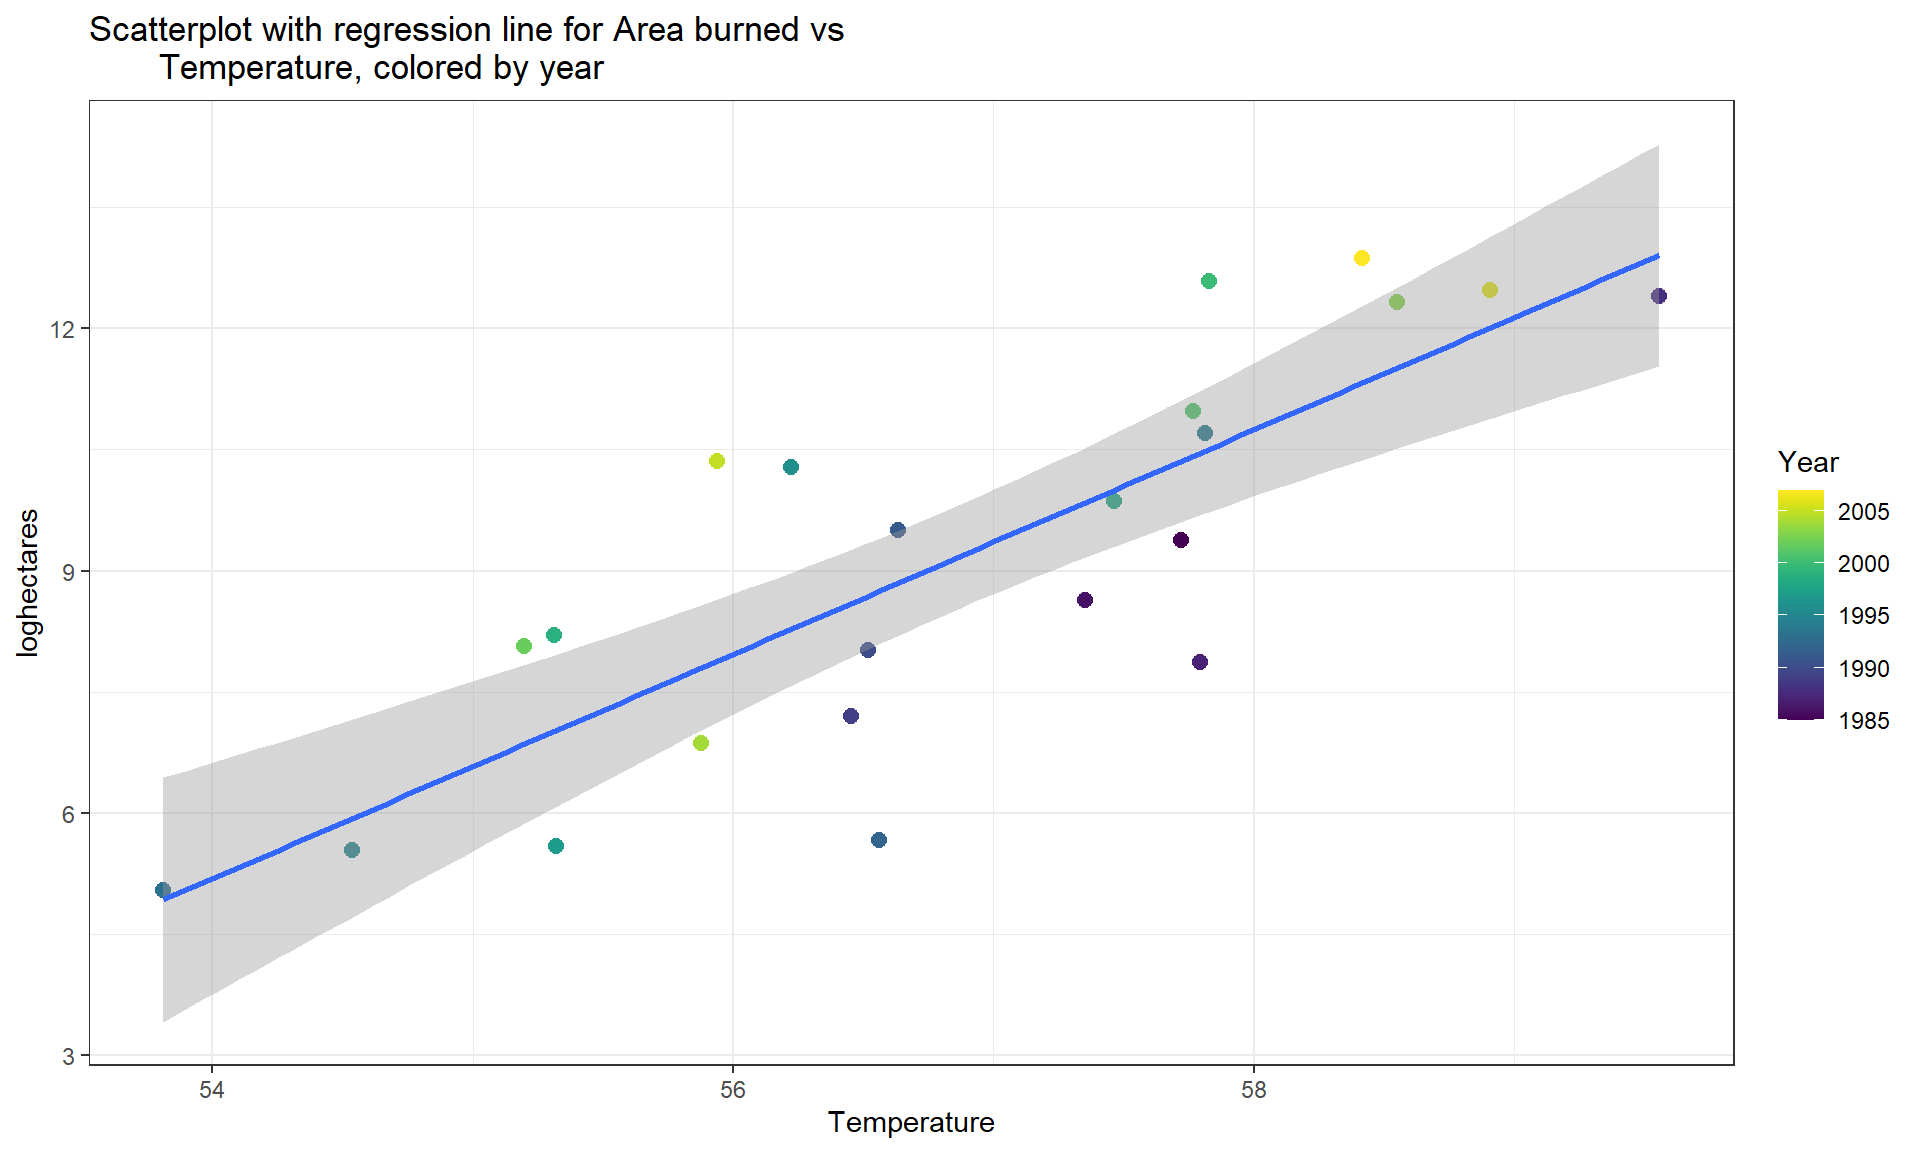 Scatterplot of log-hectares burned versus temperature with estimated regression line. Information on the year of each observation is added using a local aesthetic inside geom_point to color the points on a color gradient based on Year.